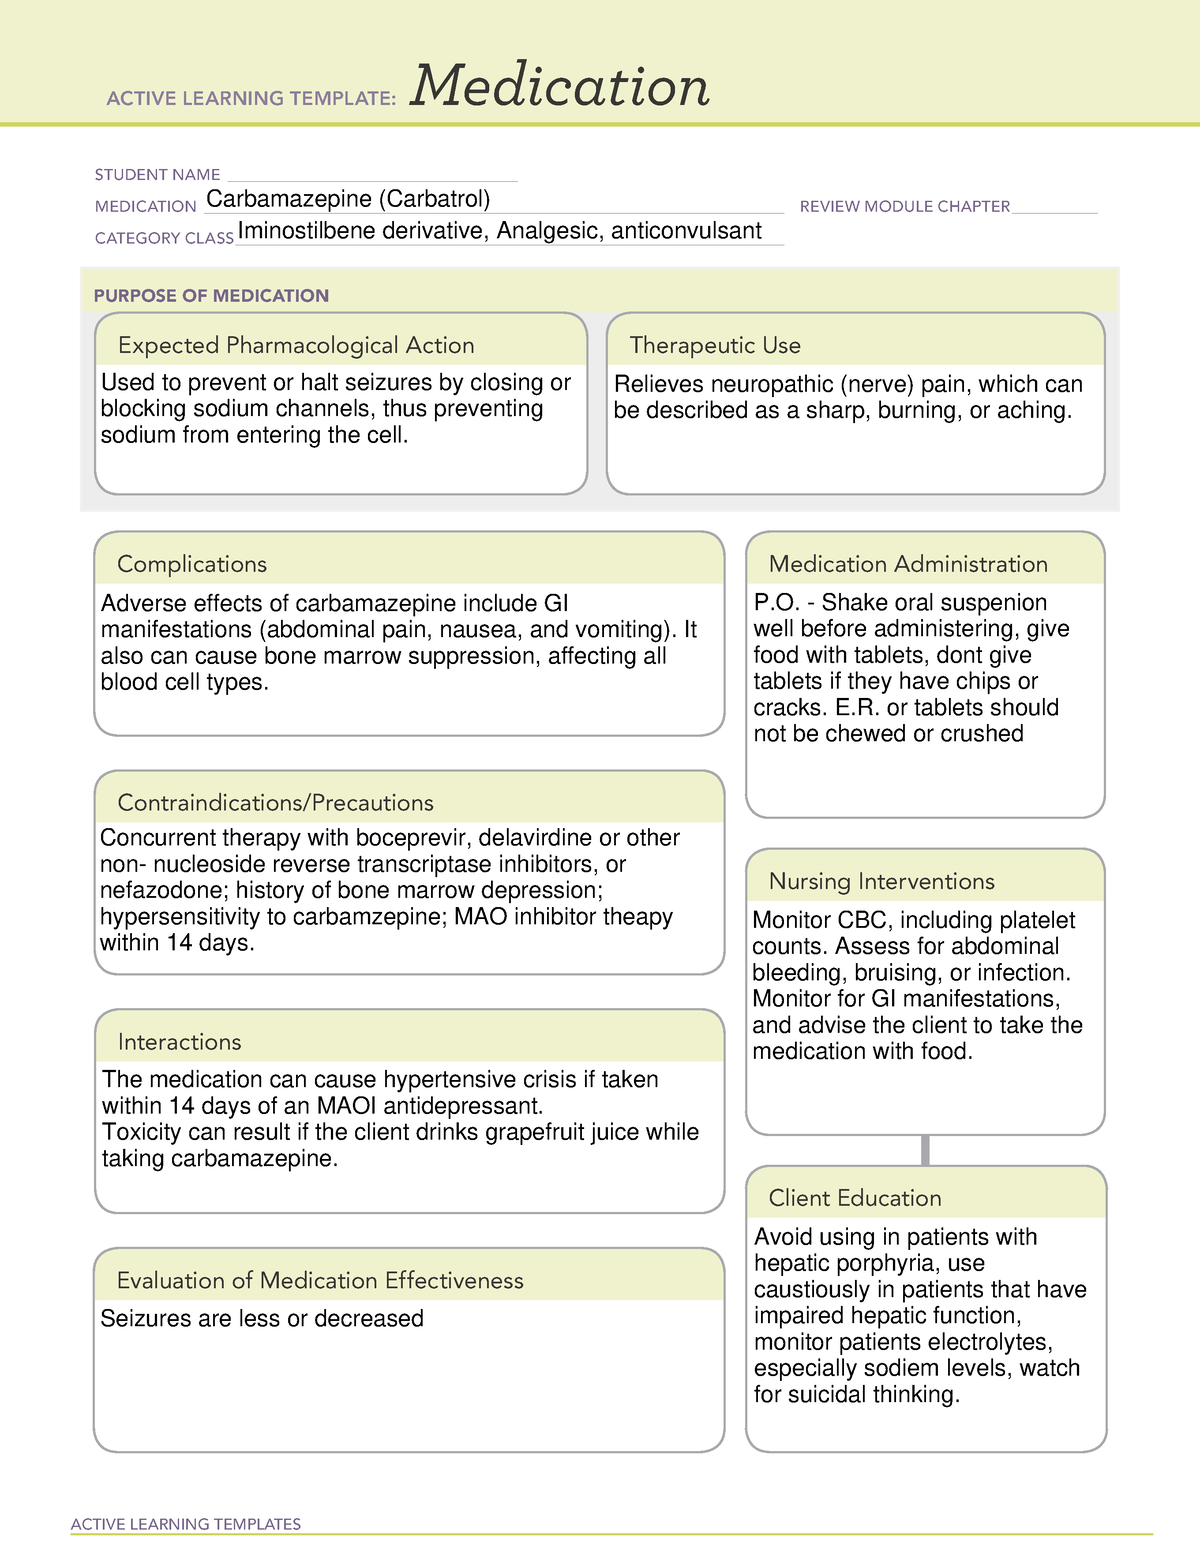 ati-med-form-carbamazepine-active-learning-templates-medication